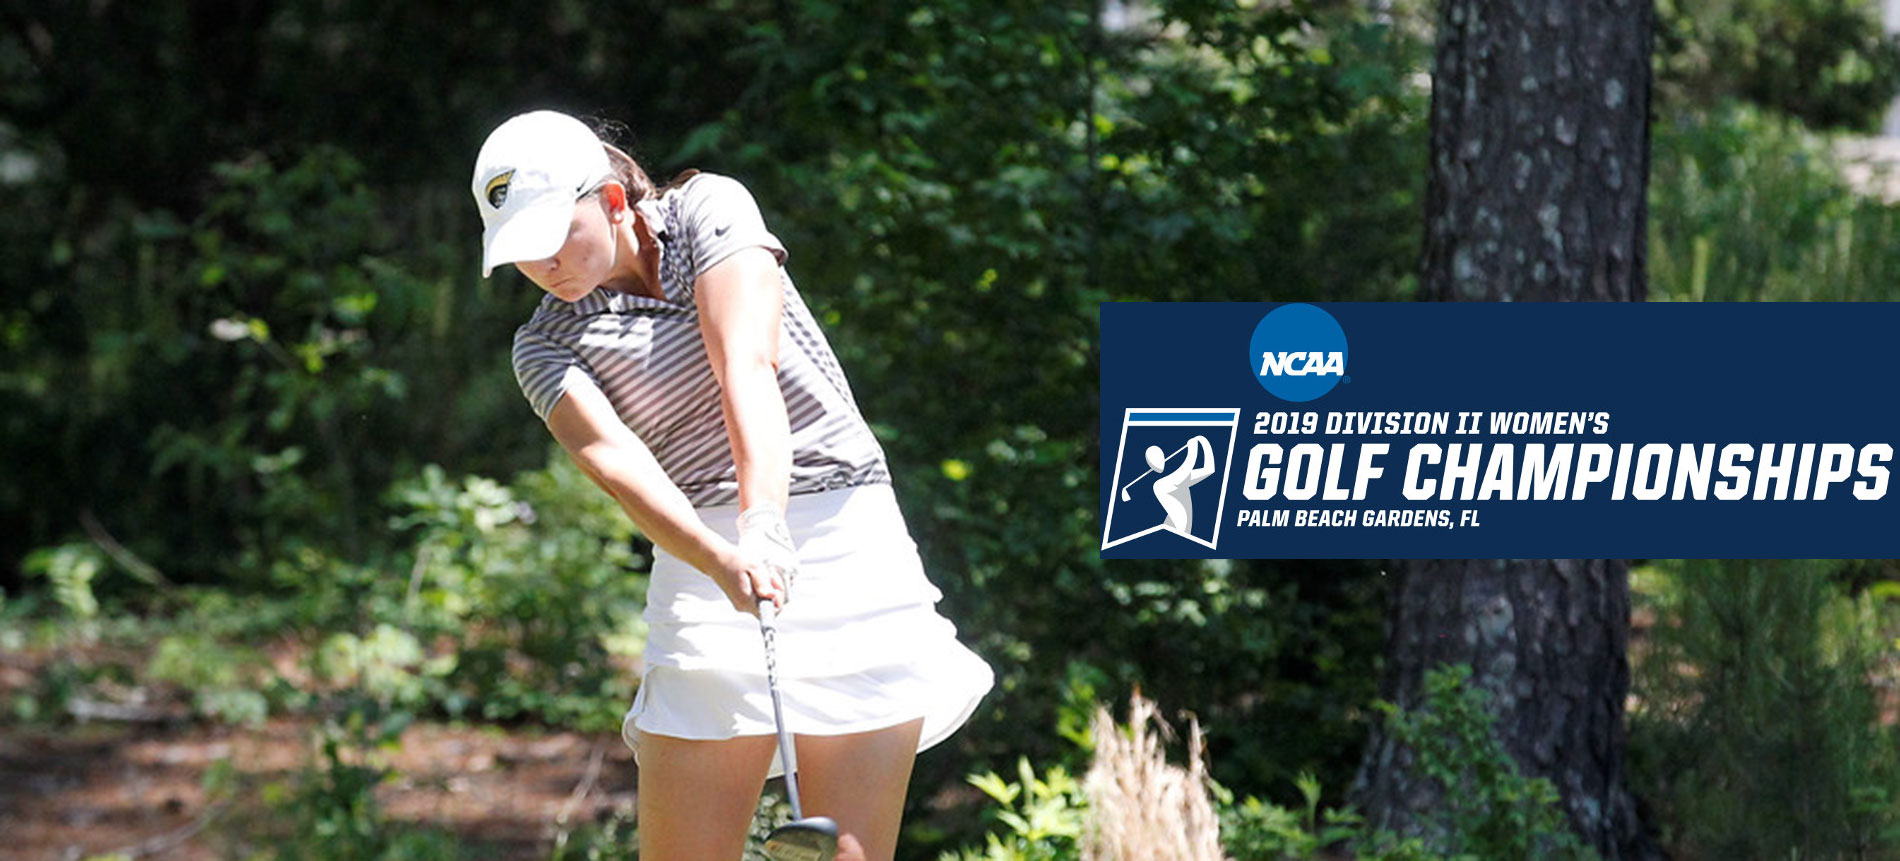 Victoria Hall Deadlocked in Tie for 61st Place After Two Rounds of NCAA Women’s Golf Championships